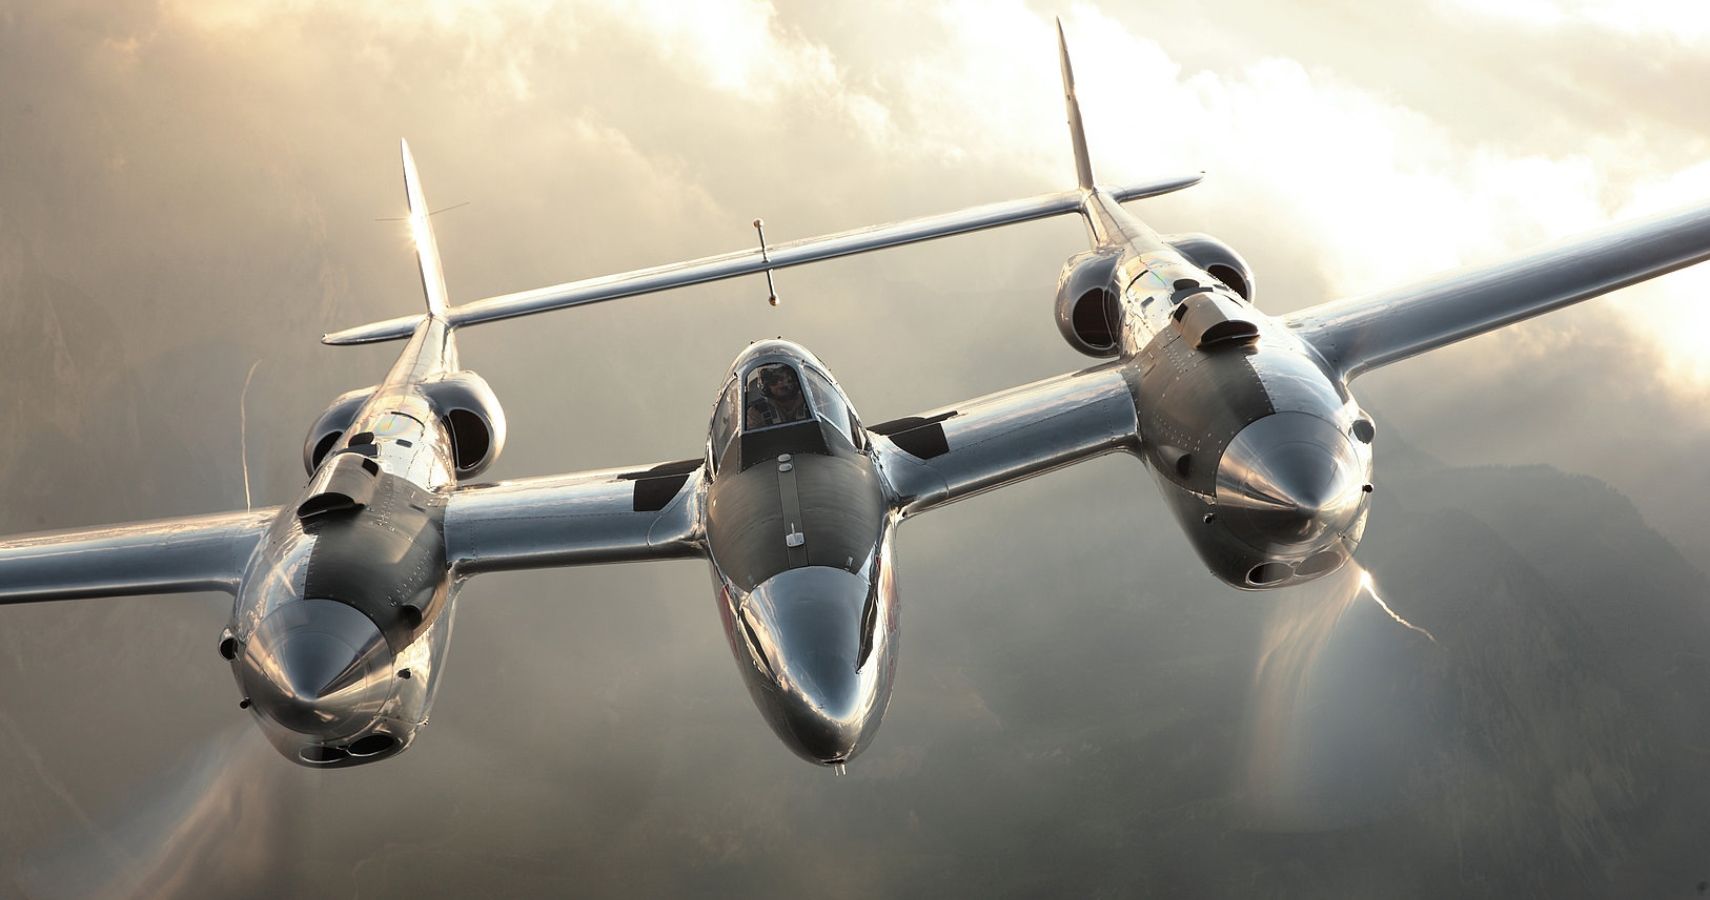 How The U.S. Air Force’s Fork-Tailed P-38 Lightning Became Most Feared Aircraft Of World War II